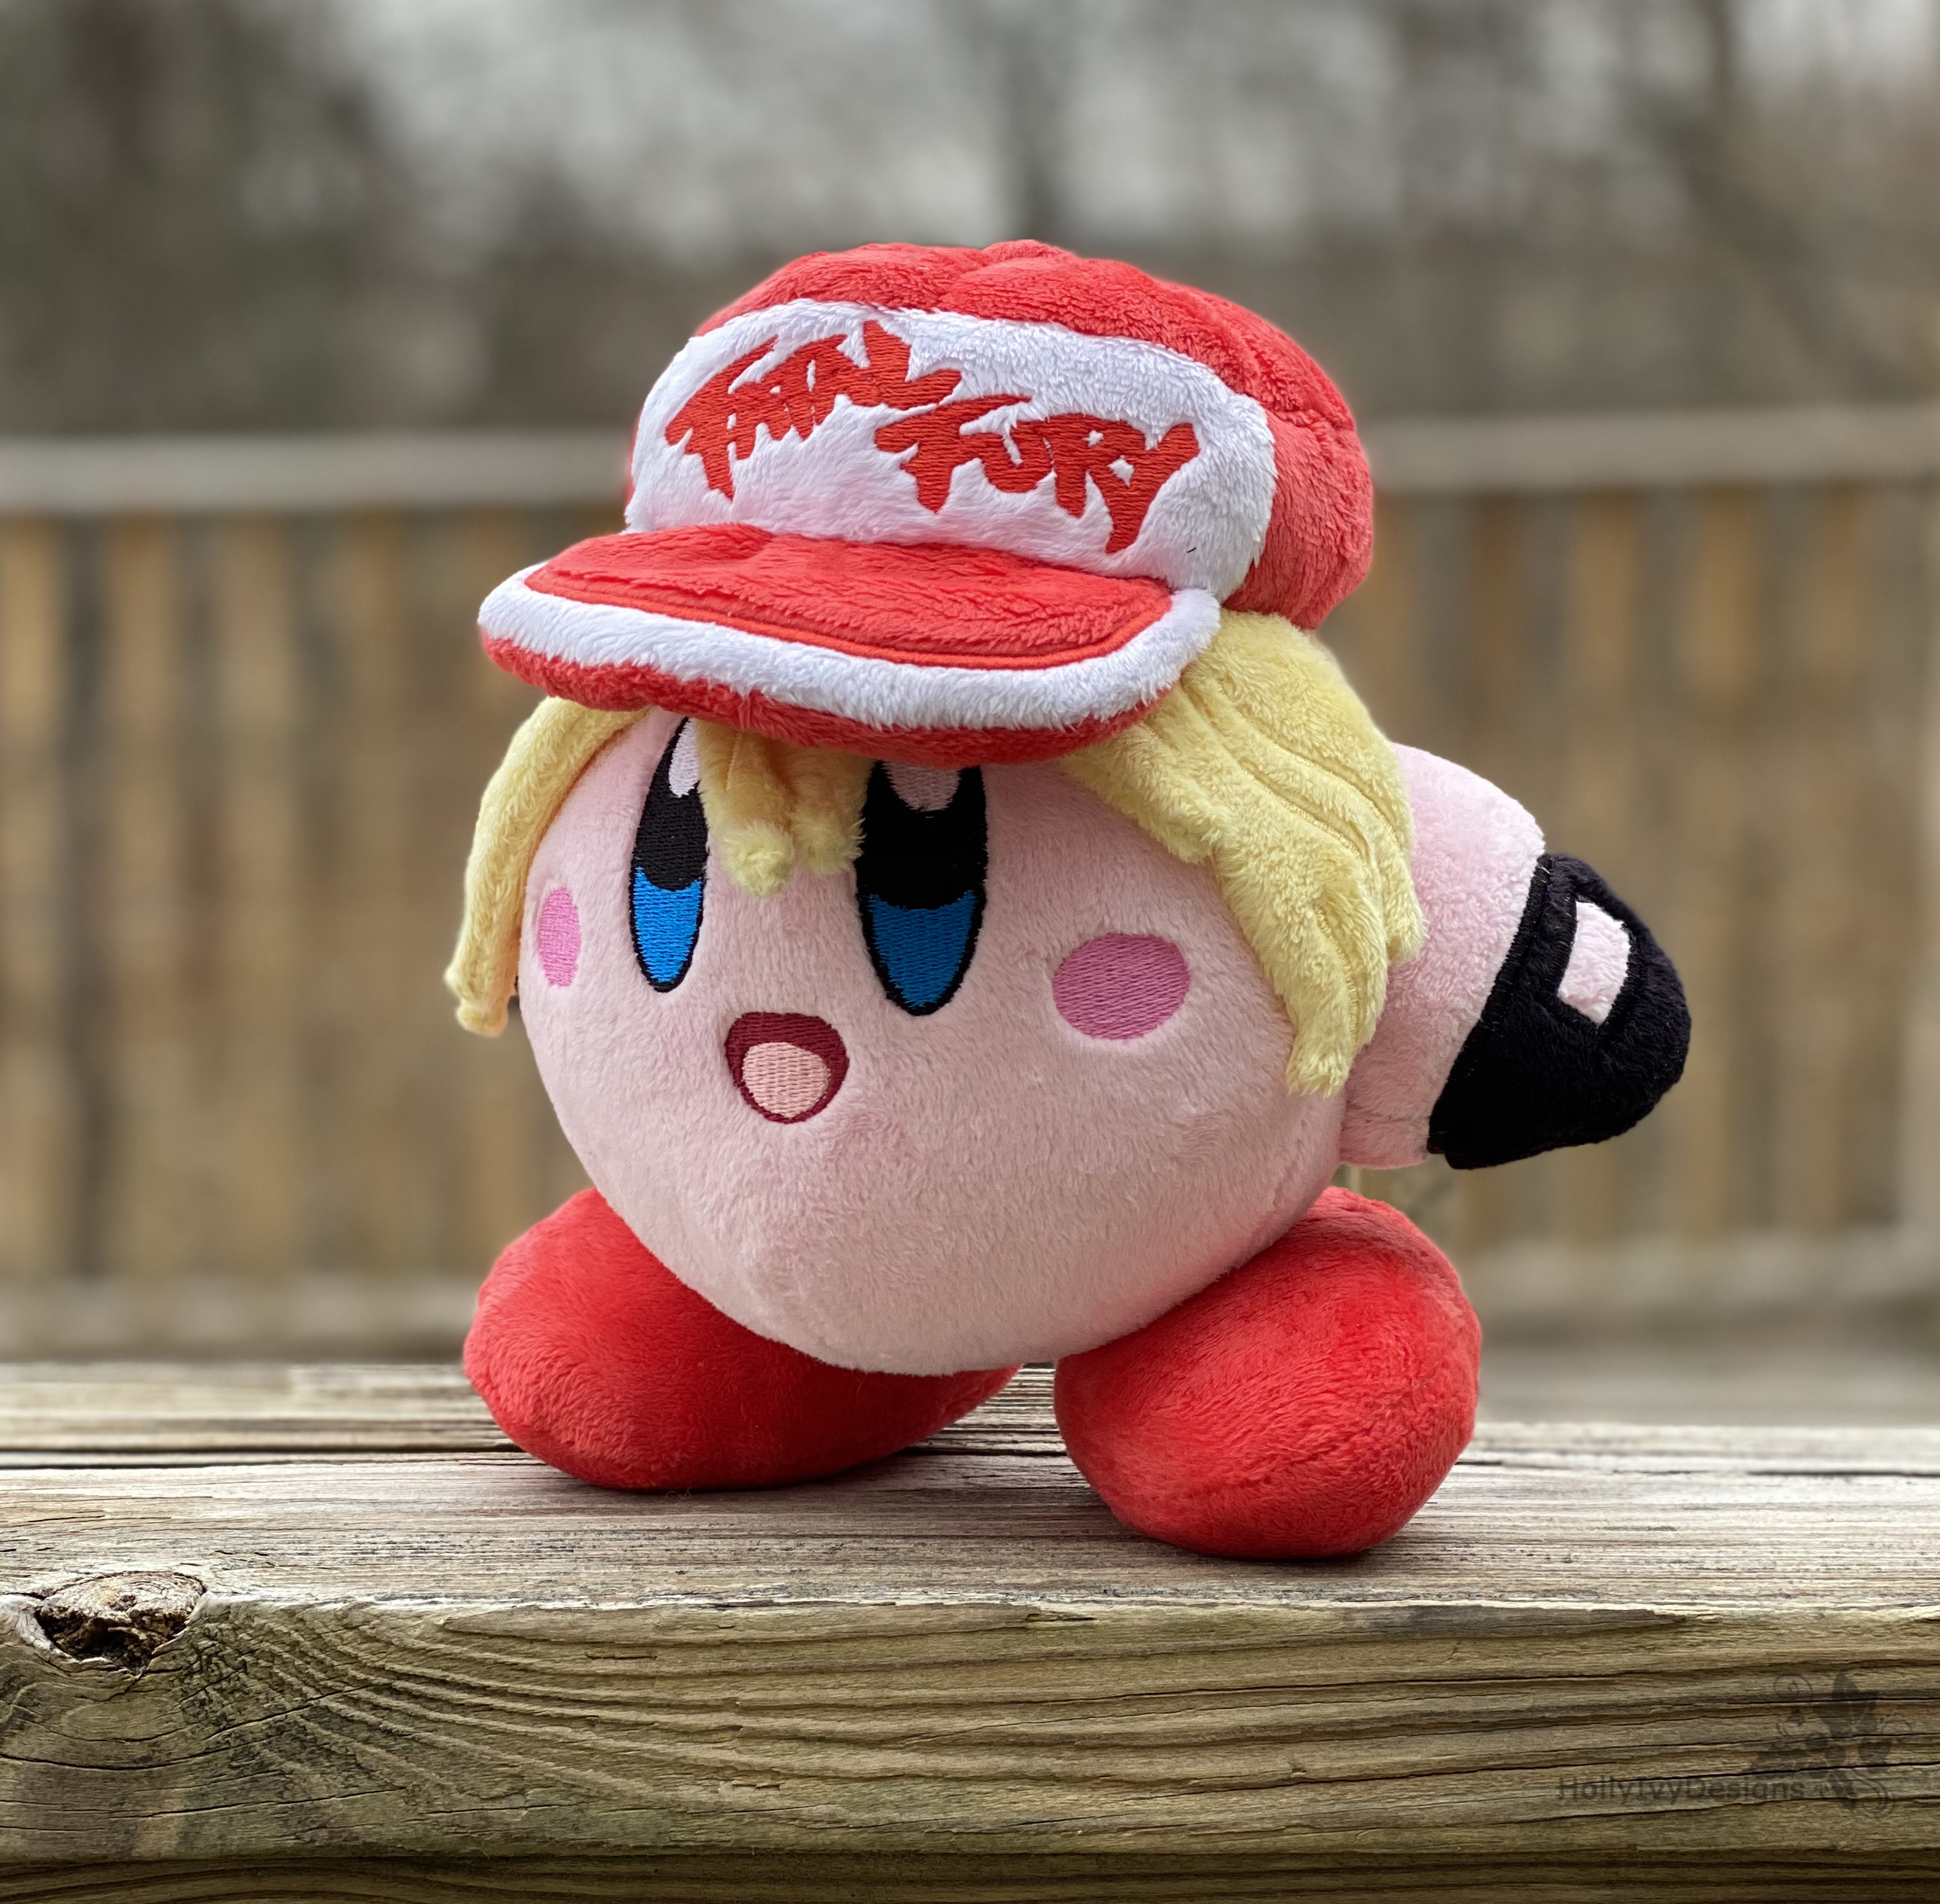 Kirby as Terry Bogard by HollyIvyDesigns on DeviantArt